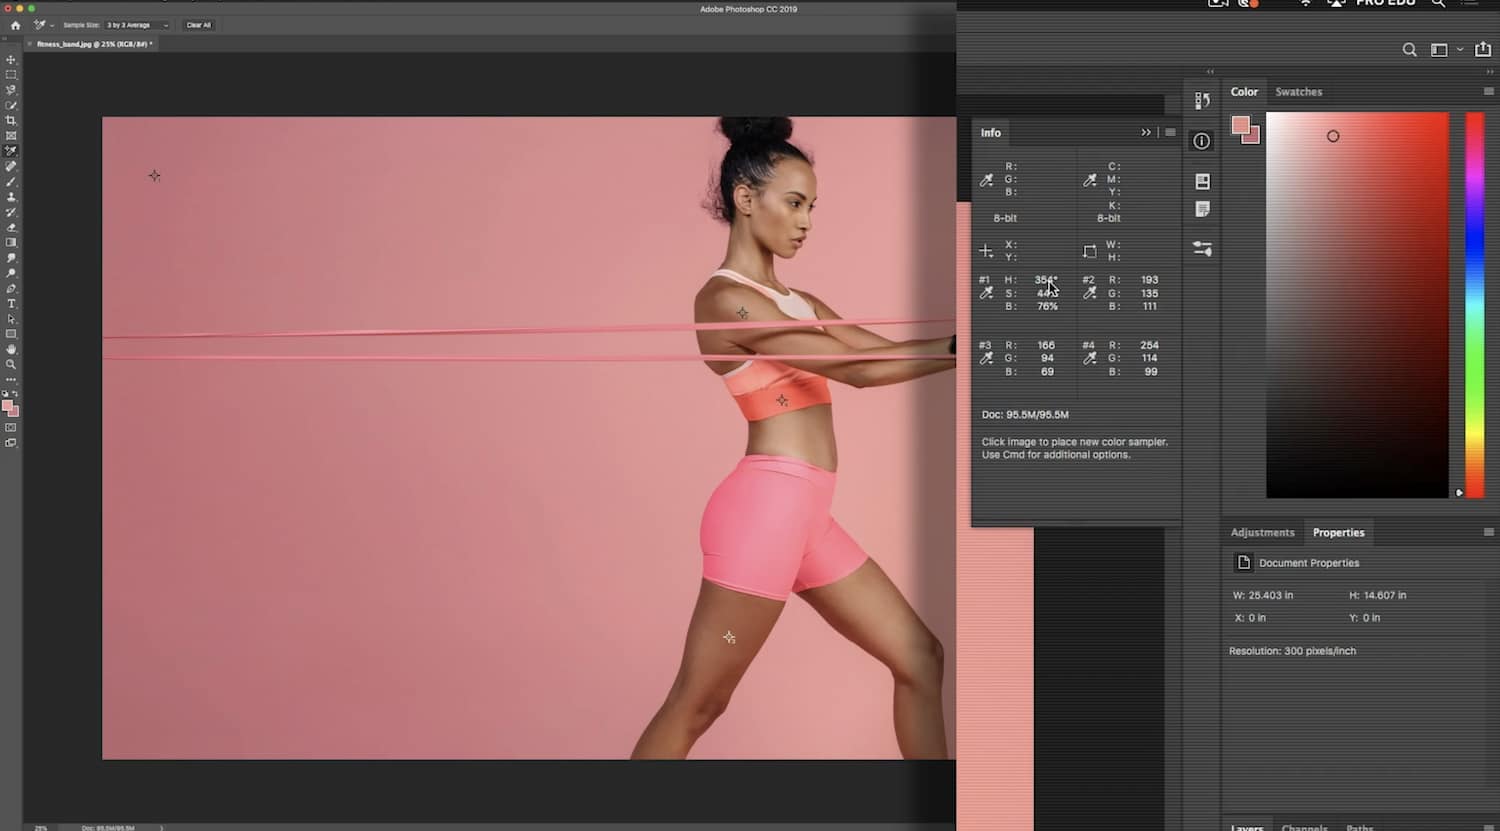 Commercial Retouching In Adobe Photoshop With Sef McCullough - | PRO EDU Tutorial for advanced retouchers and photographers looking to build foundational knowledge from the best tutorials online.